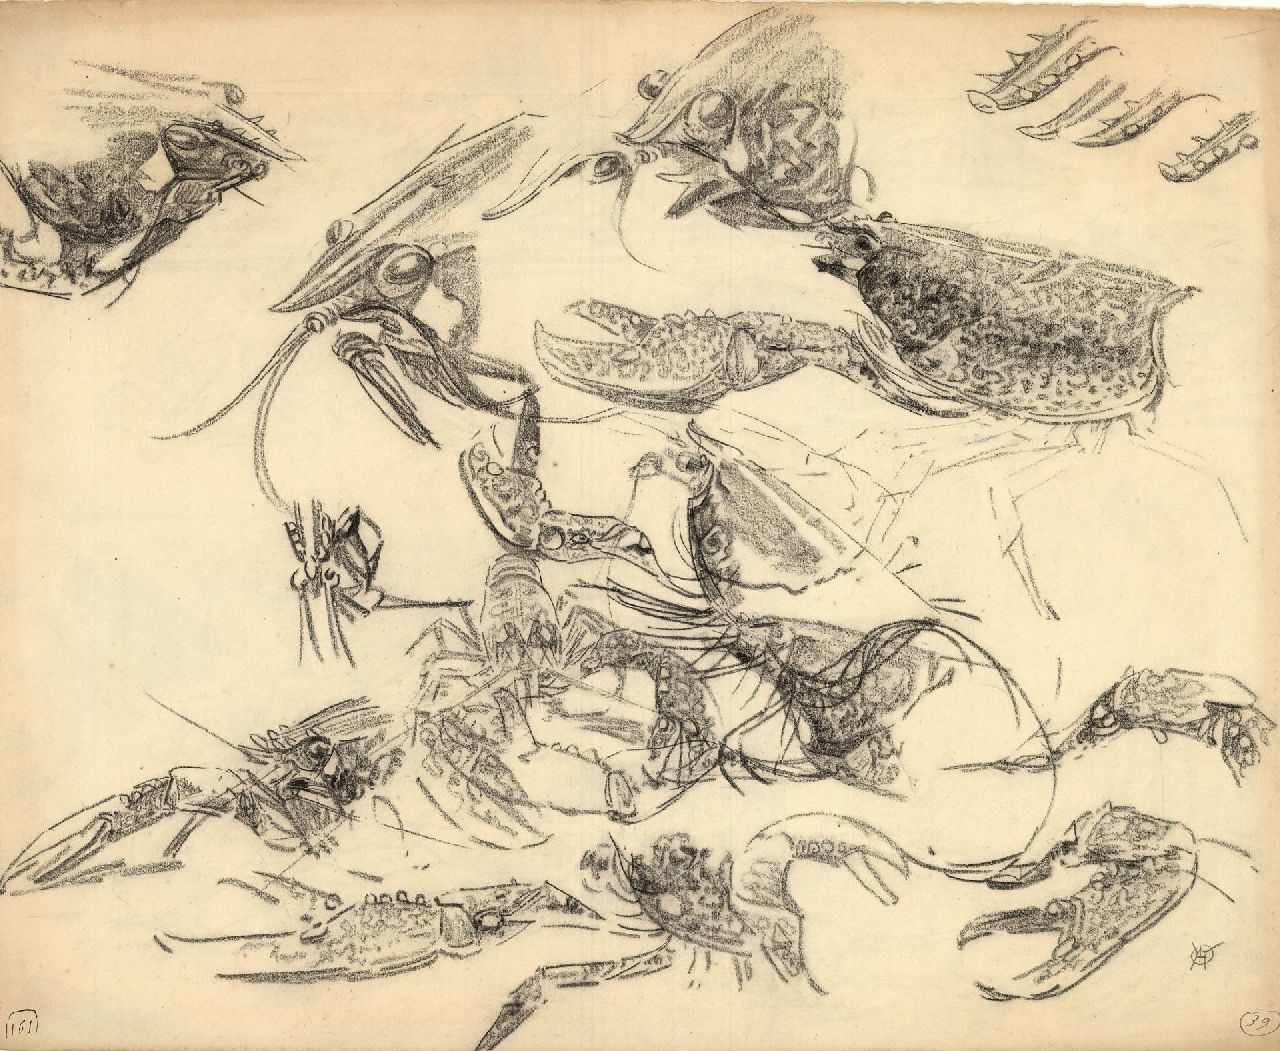 Dijsselhof G.W.  | Gerrit Willem Dijsselhof | Watercolours and drawings offered for sale | Study of lobsters and crayfish, black chalk on paper 34.4 x 42.5 cm, signed l.r. with monogram